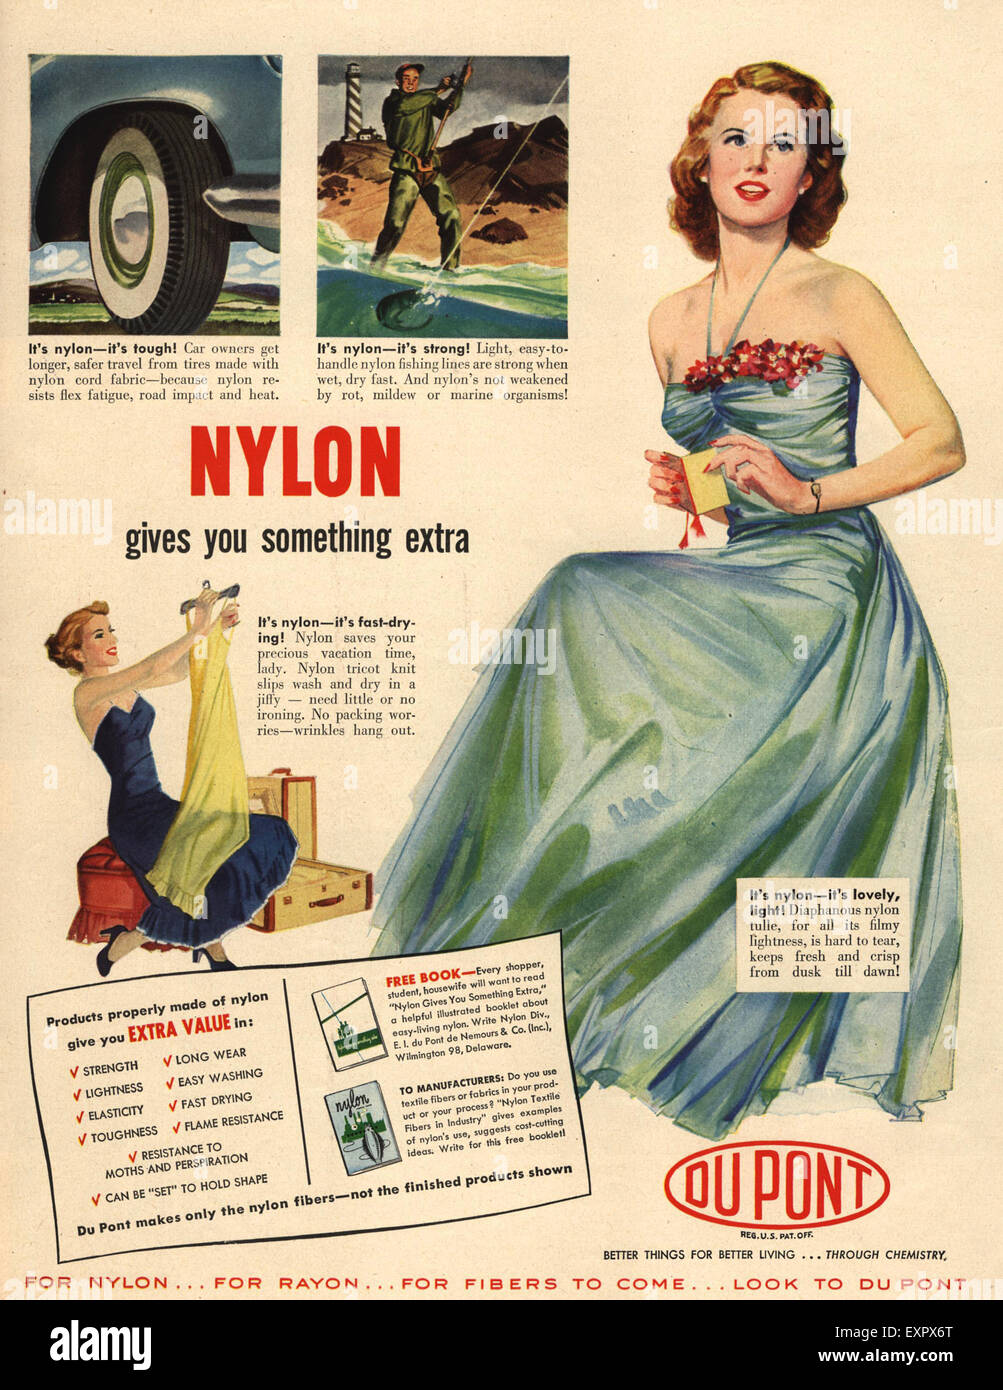 Dupont Nylon High Resolution Stock Photography and Images - Alamy